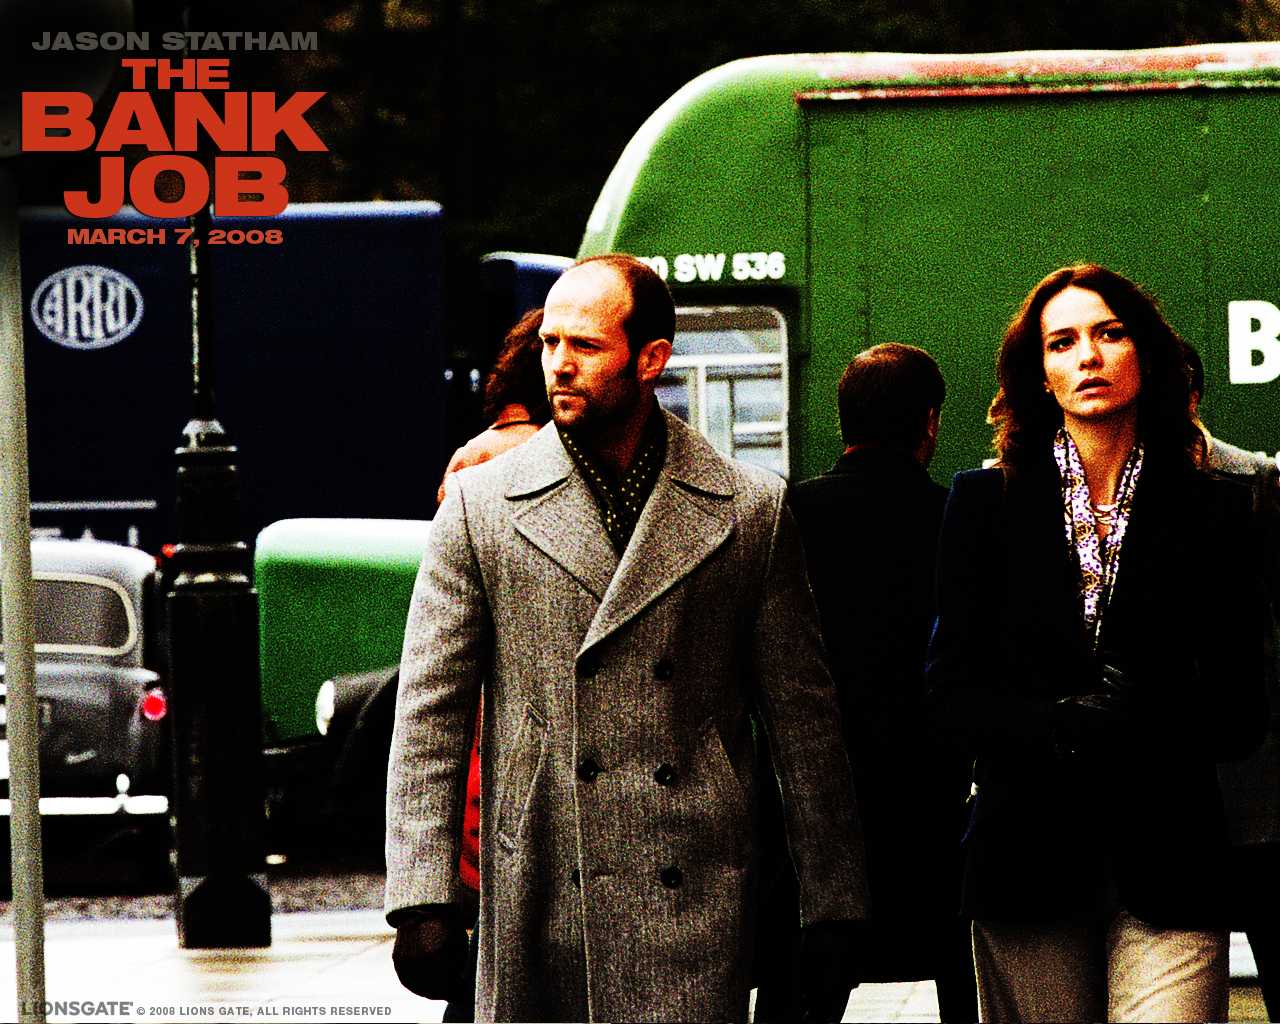 Download High quality The Bank Job wallpaper / Movies / 1280x1024